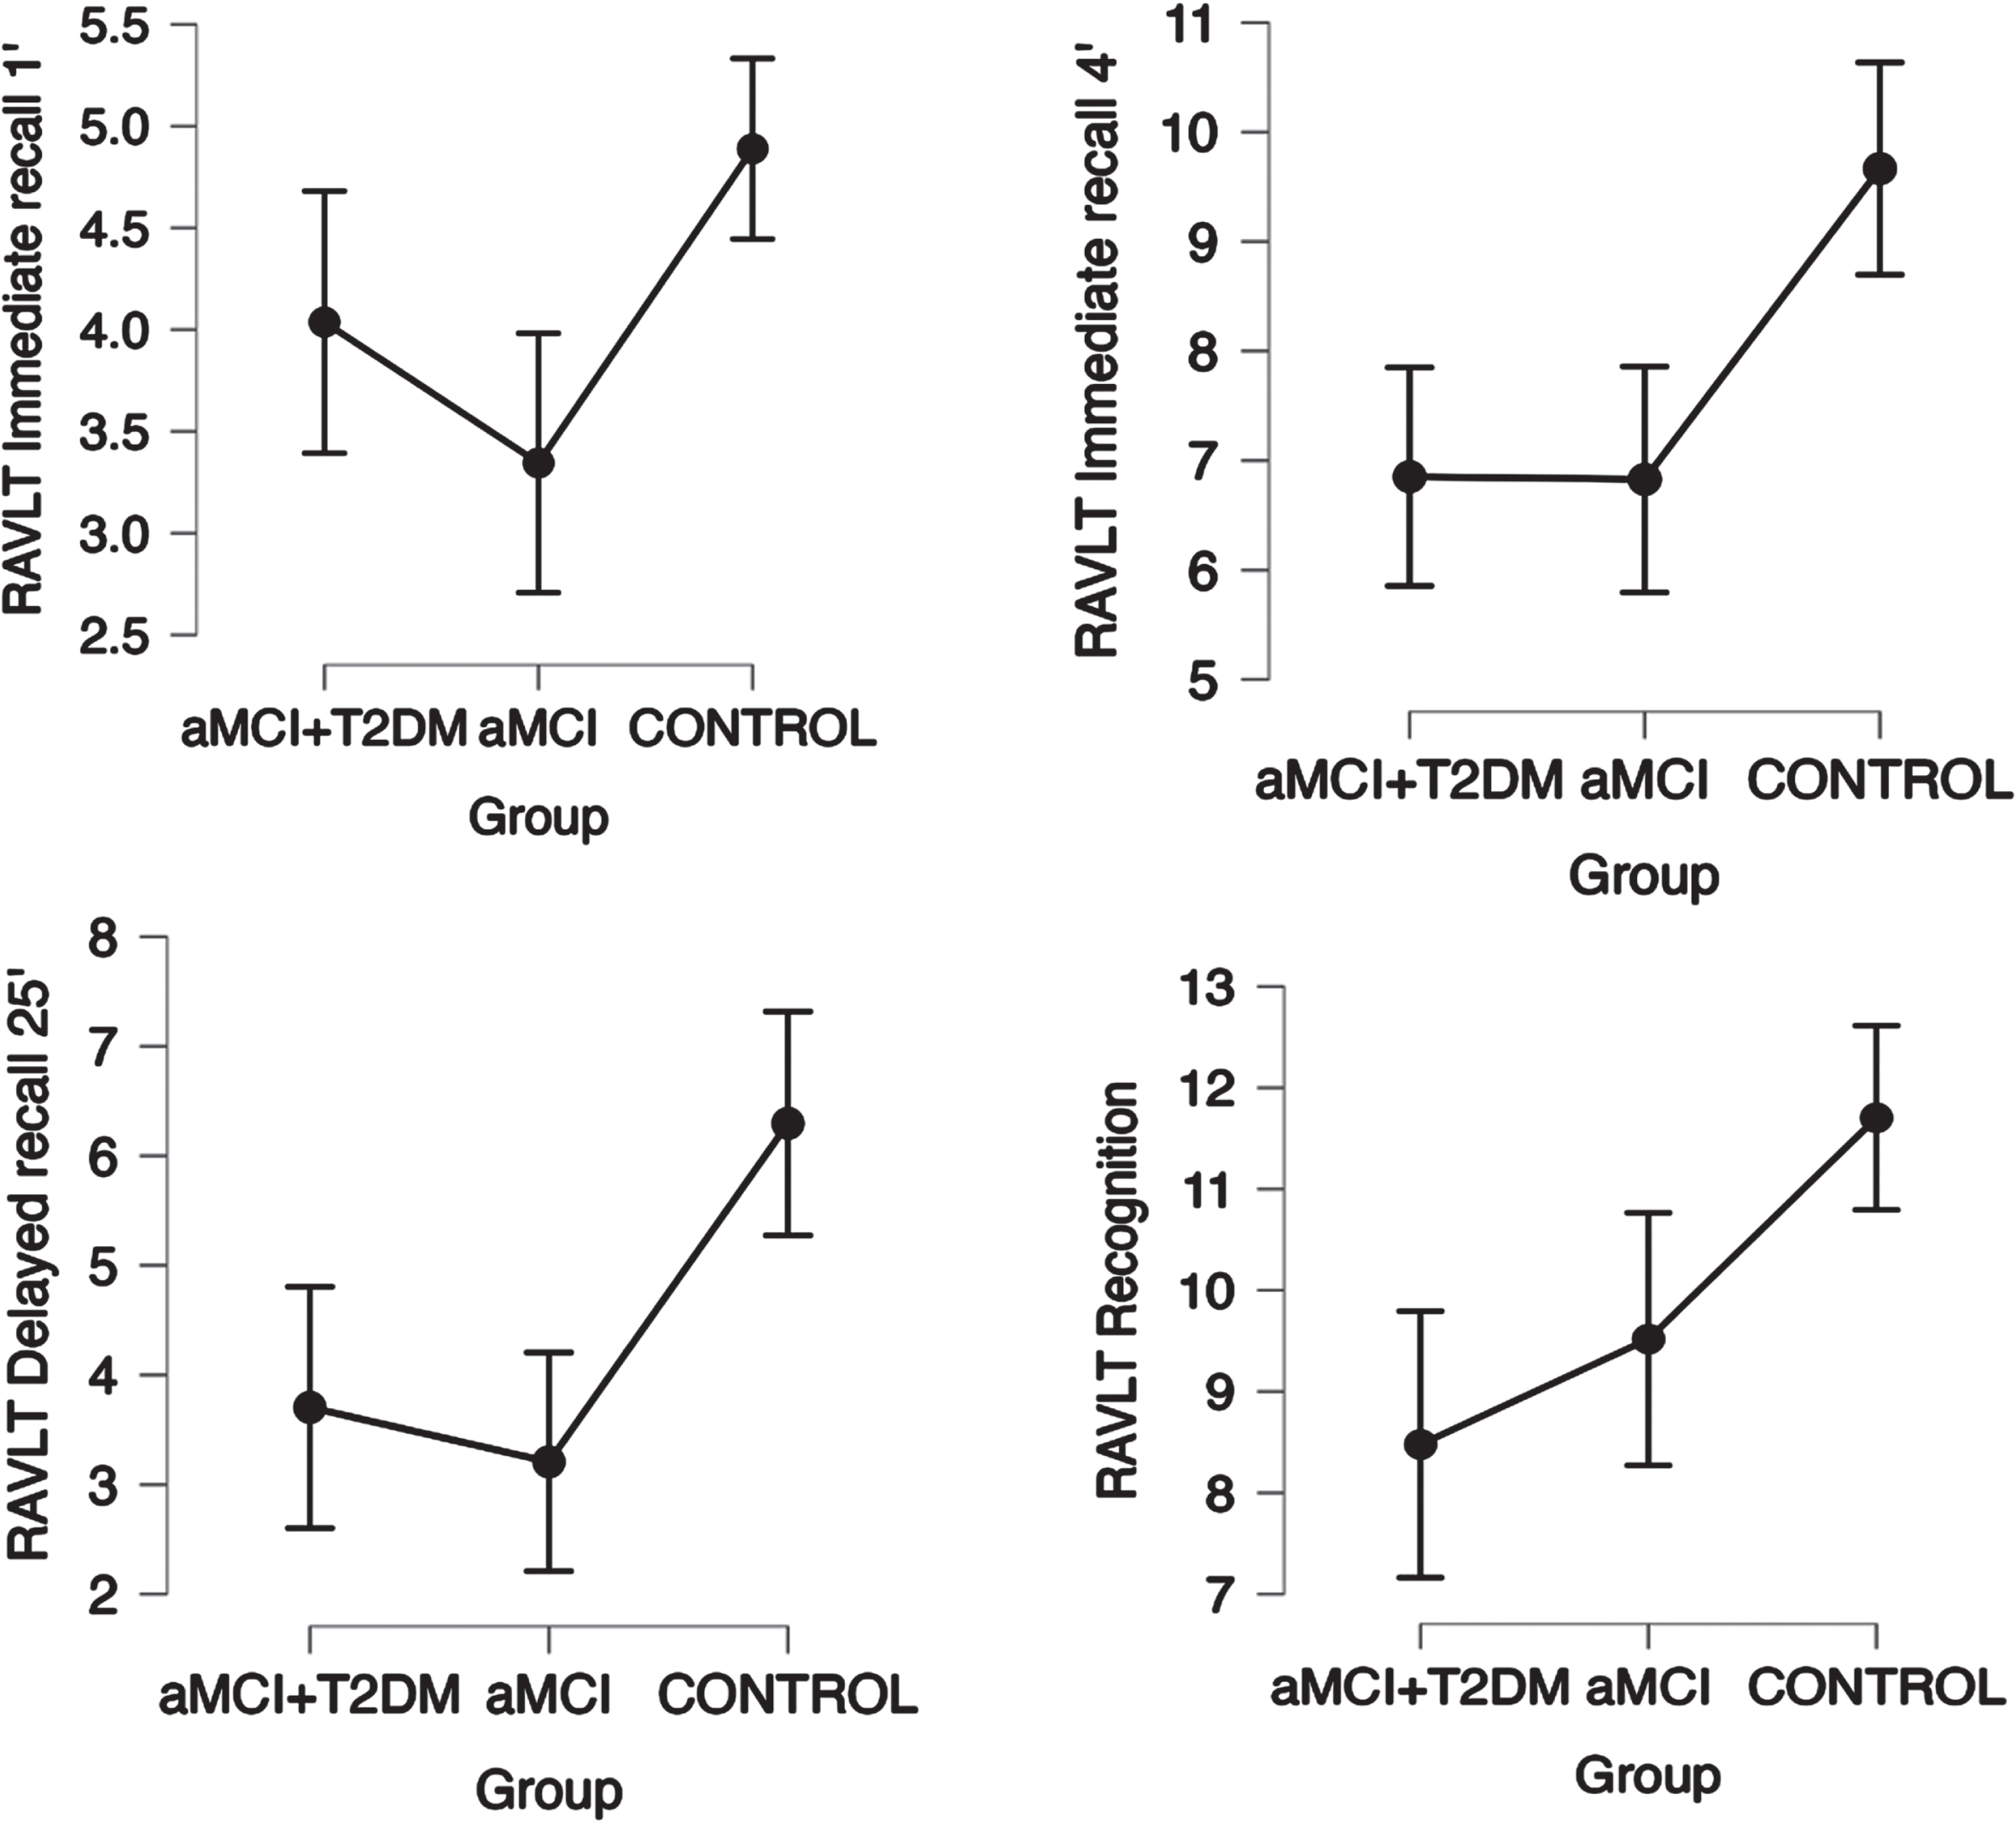 Linear trend between groups in neuropsychological tests for auditory-verbal memory (RALVT Test) with a statistically significant trend (p trend < 0.05) with a 95% confidence interval. Points represent mean values and bars indicate 95% confidence interval. aMCI-T2DM, amnesic mild cognitive impairment with type 2 diabetes; aMCI, amnesic mild cognitive impairment; RALVT, Auditory Verbal Learning Test.